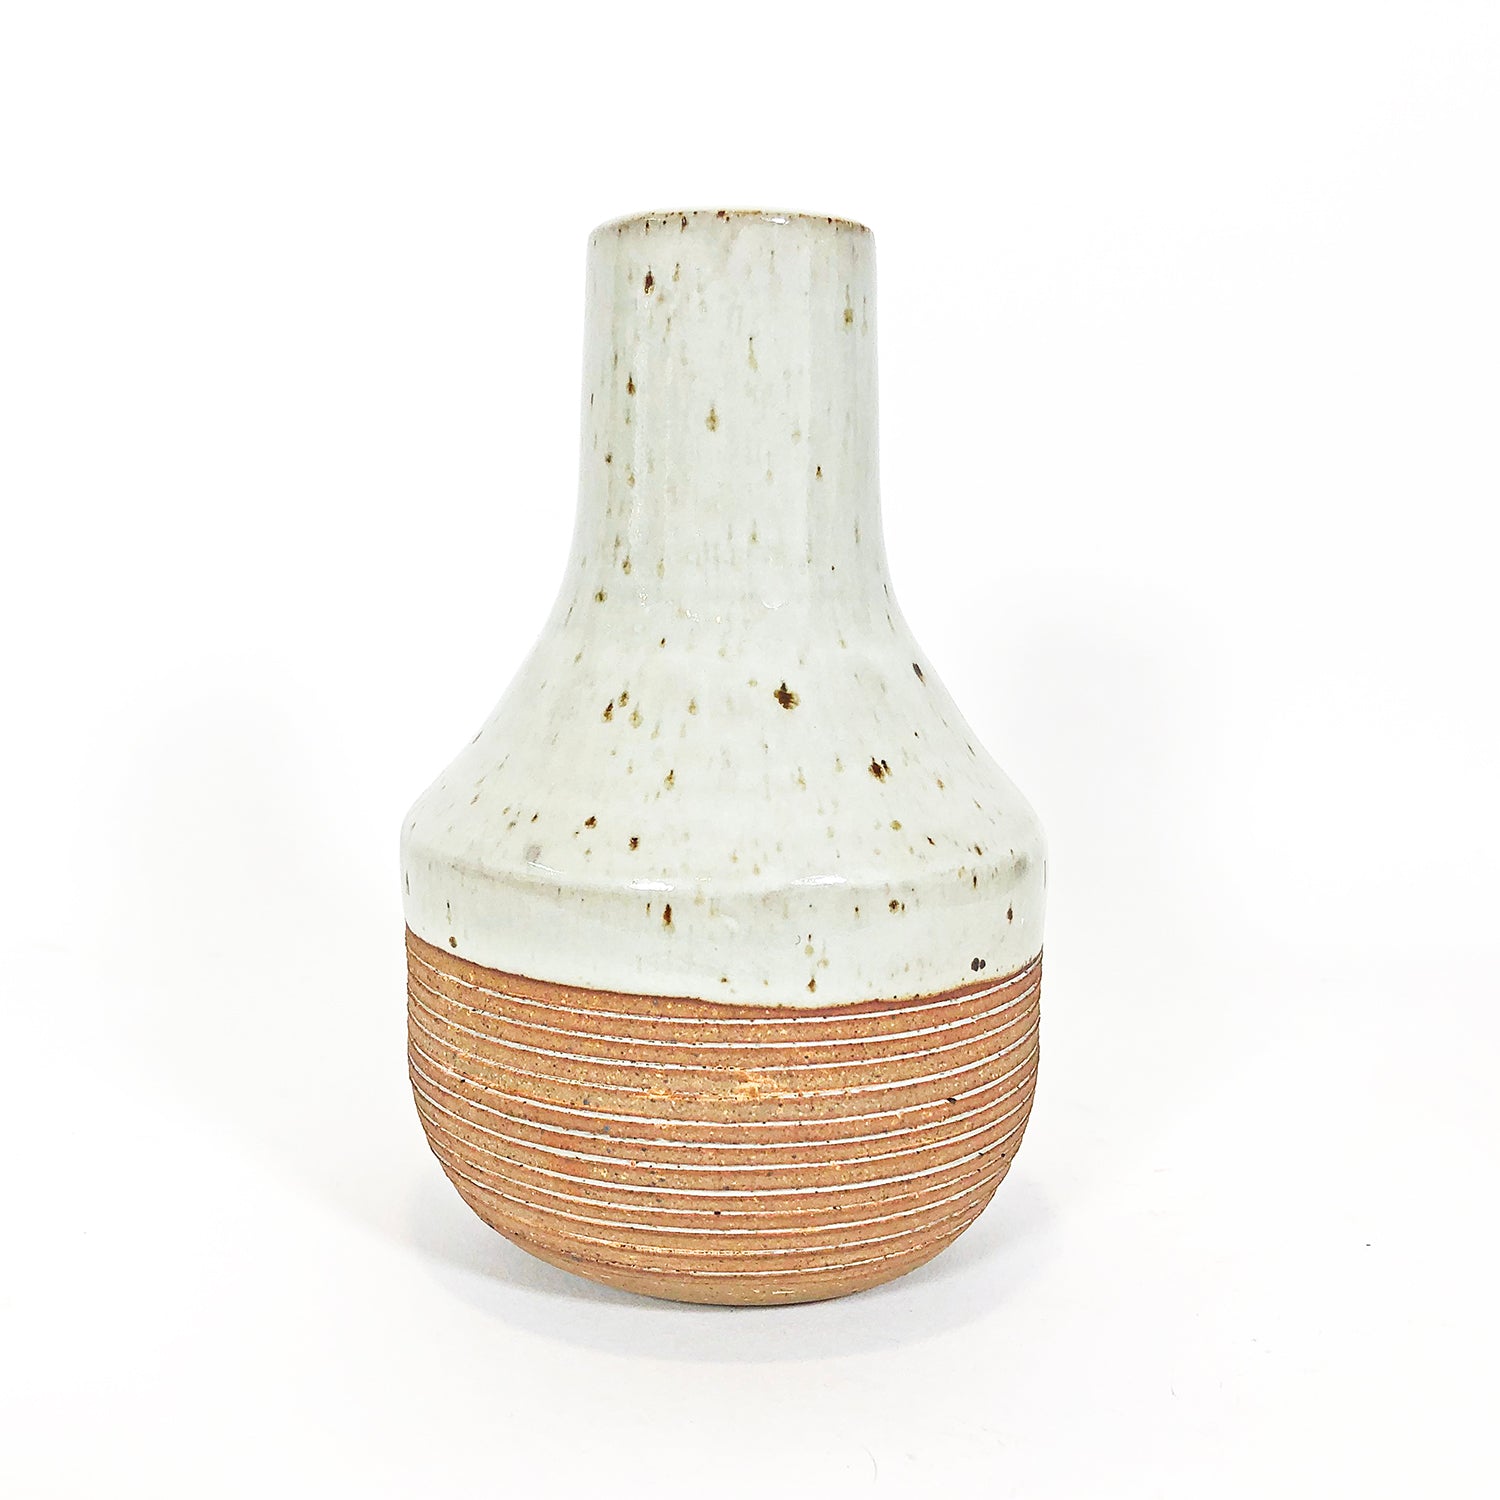 6 Inch White & Natural Clay Vase